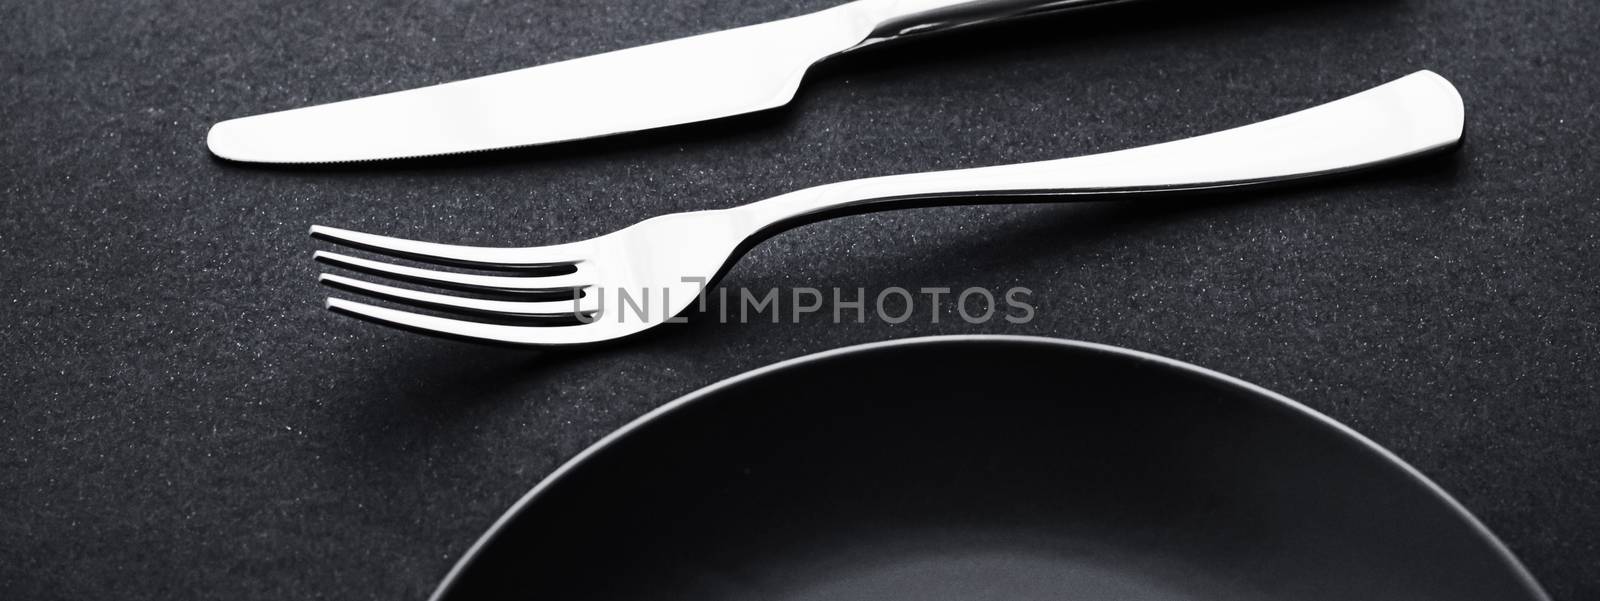 Empty plates and silverware on black background, premium tableware for holiday dinner, minimalistic design and diet concept